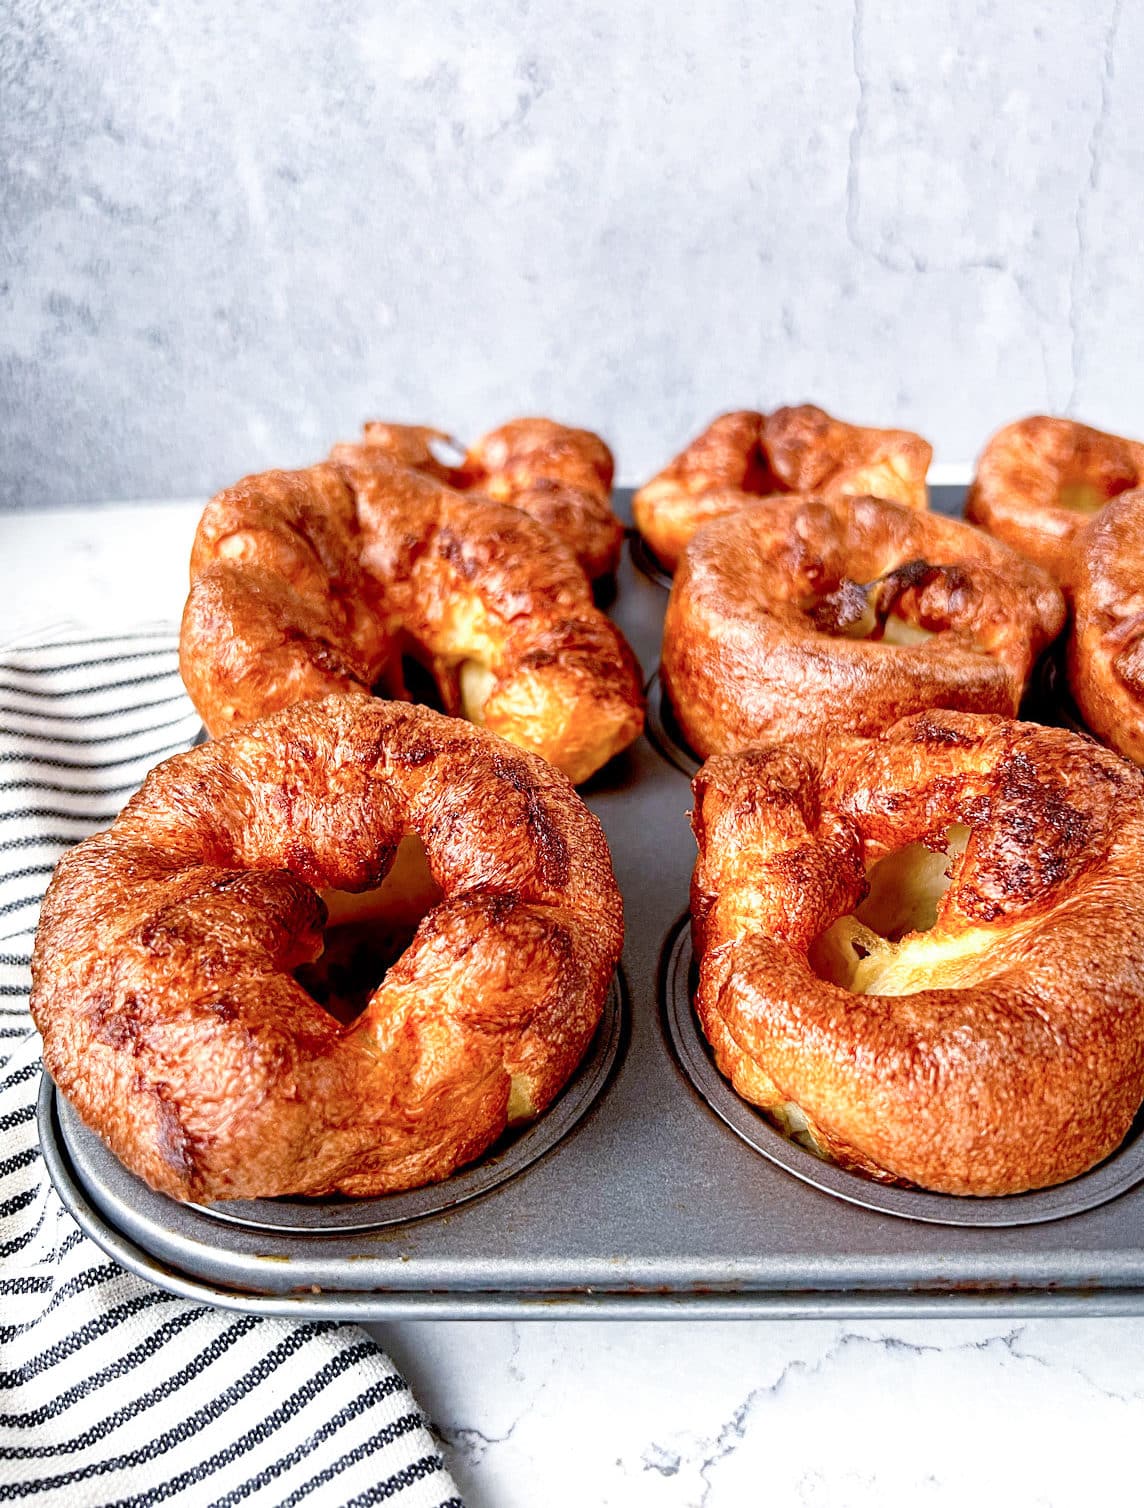 The 7 Best Yorkshire Pudding Tins Of 2023 - Foods Guy